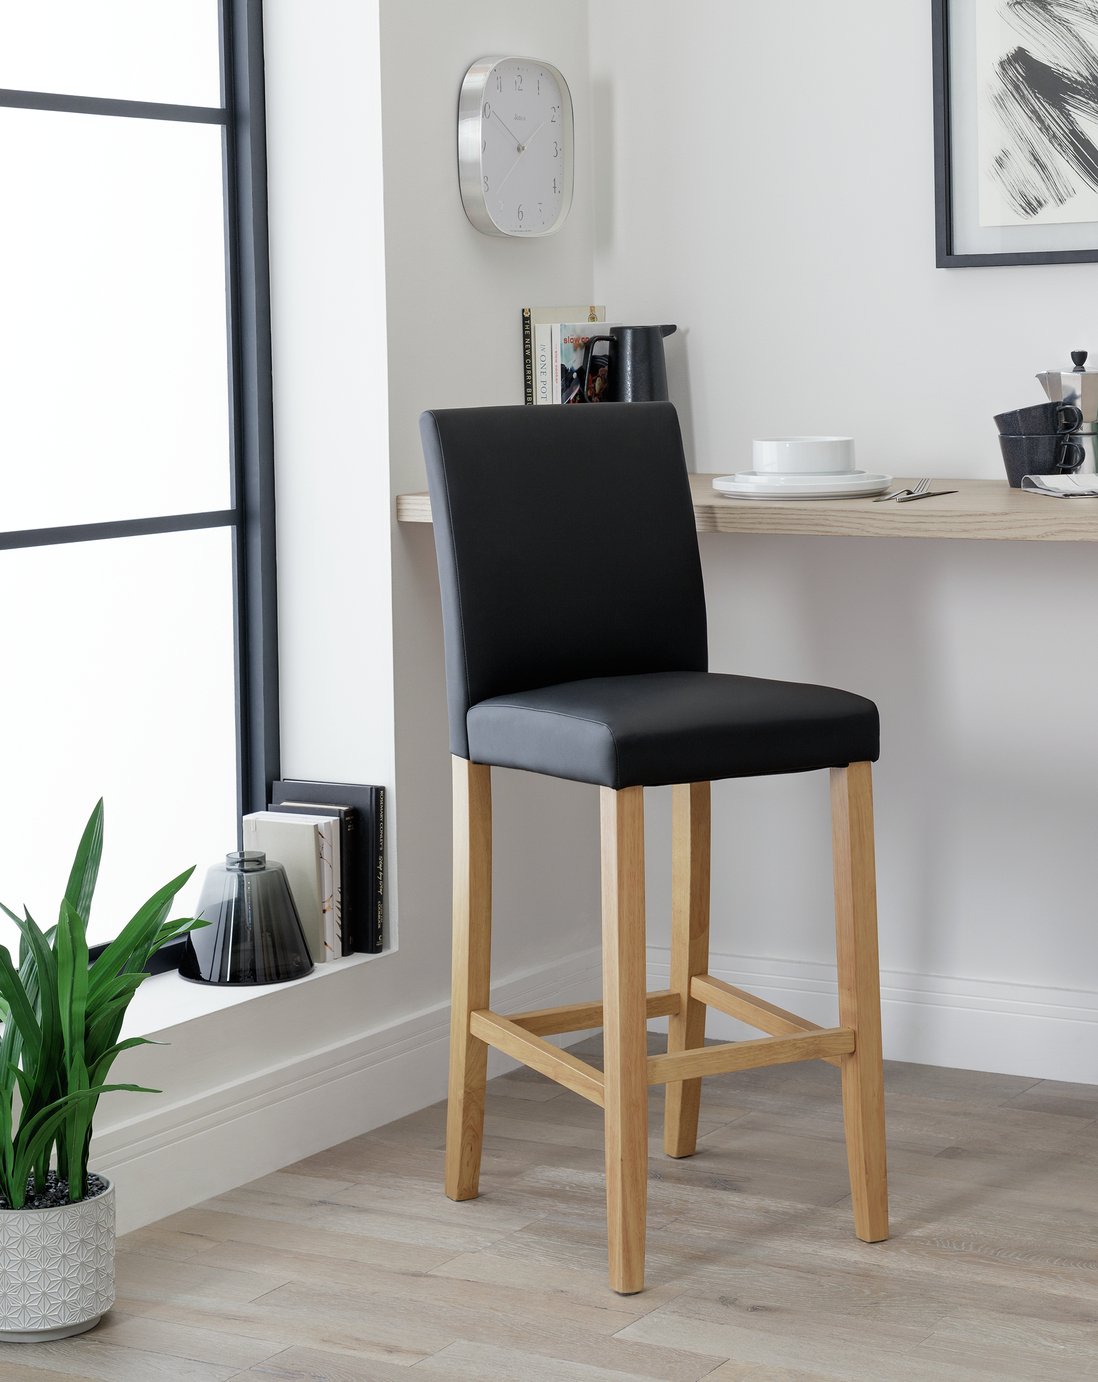 Argos Home Winslow Faux Leather Tall Bar Stool Review